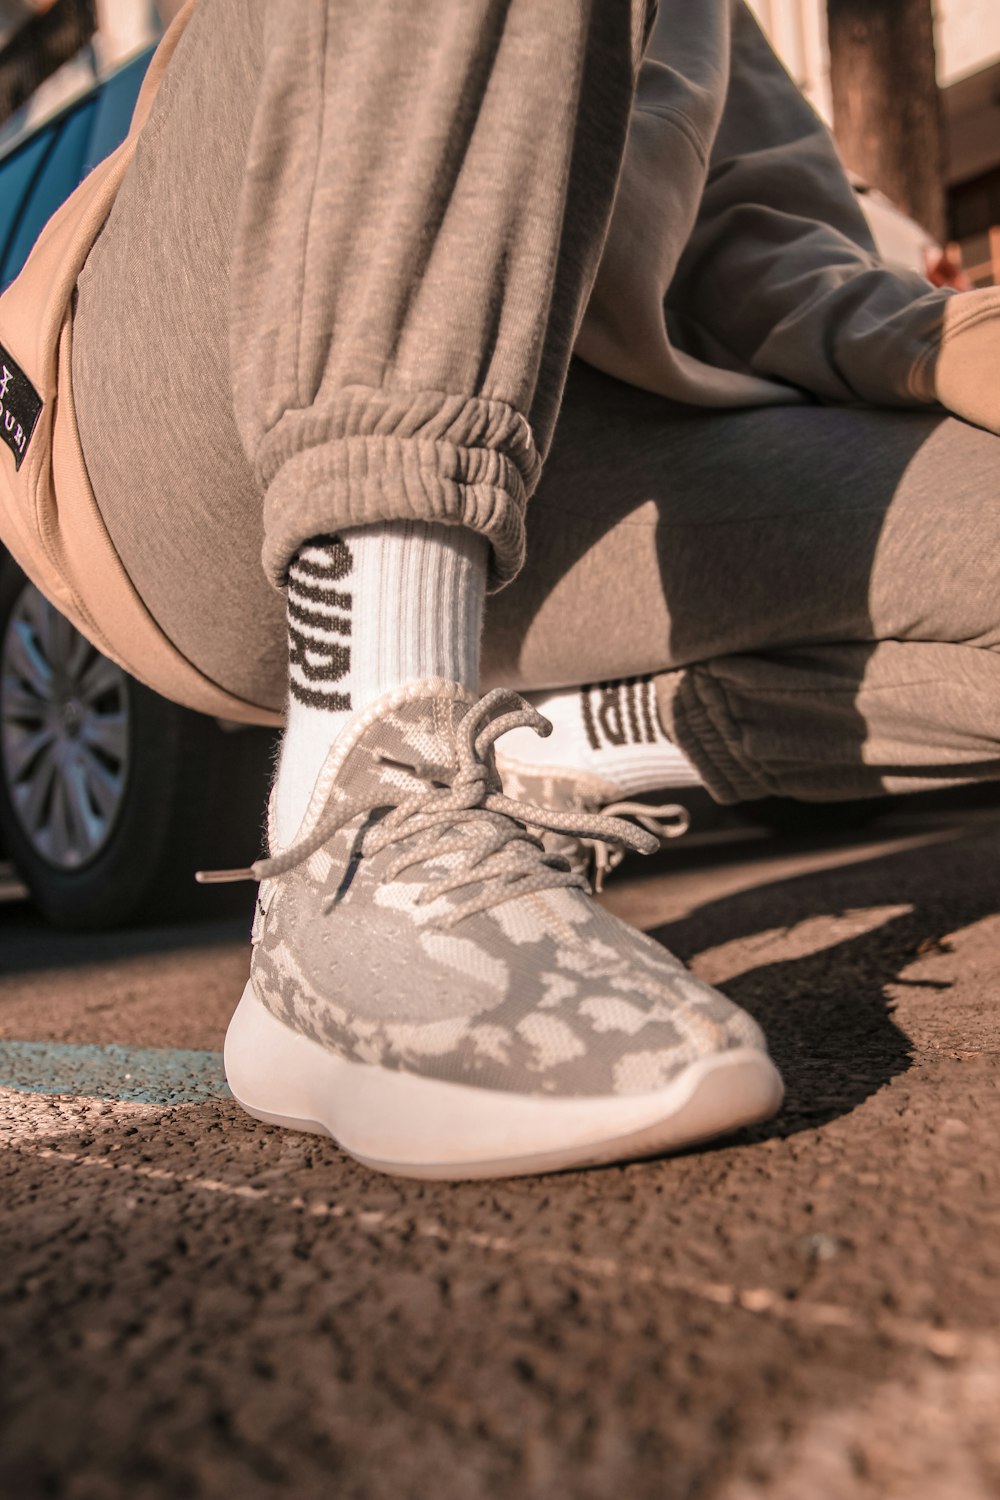 person wearing gray and white nike sneakers photo – Free Rabat Image on  Unsplash